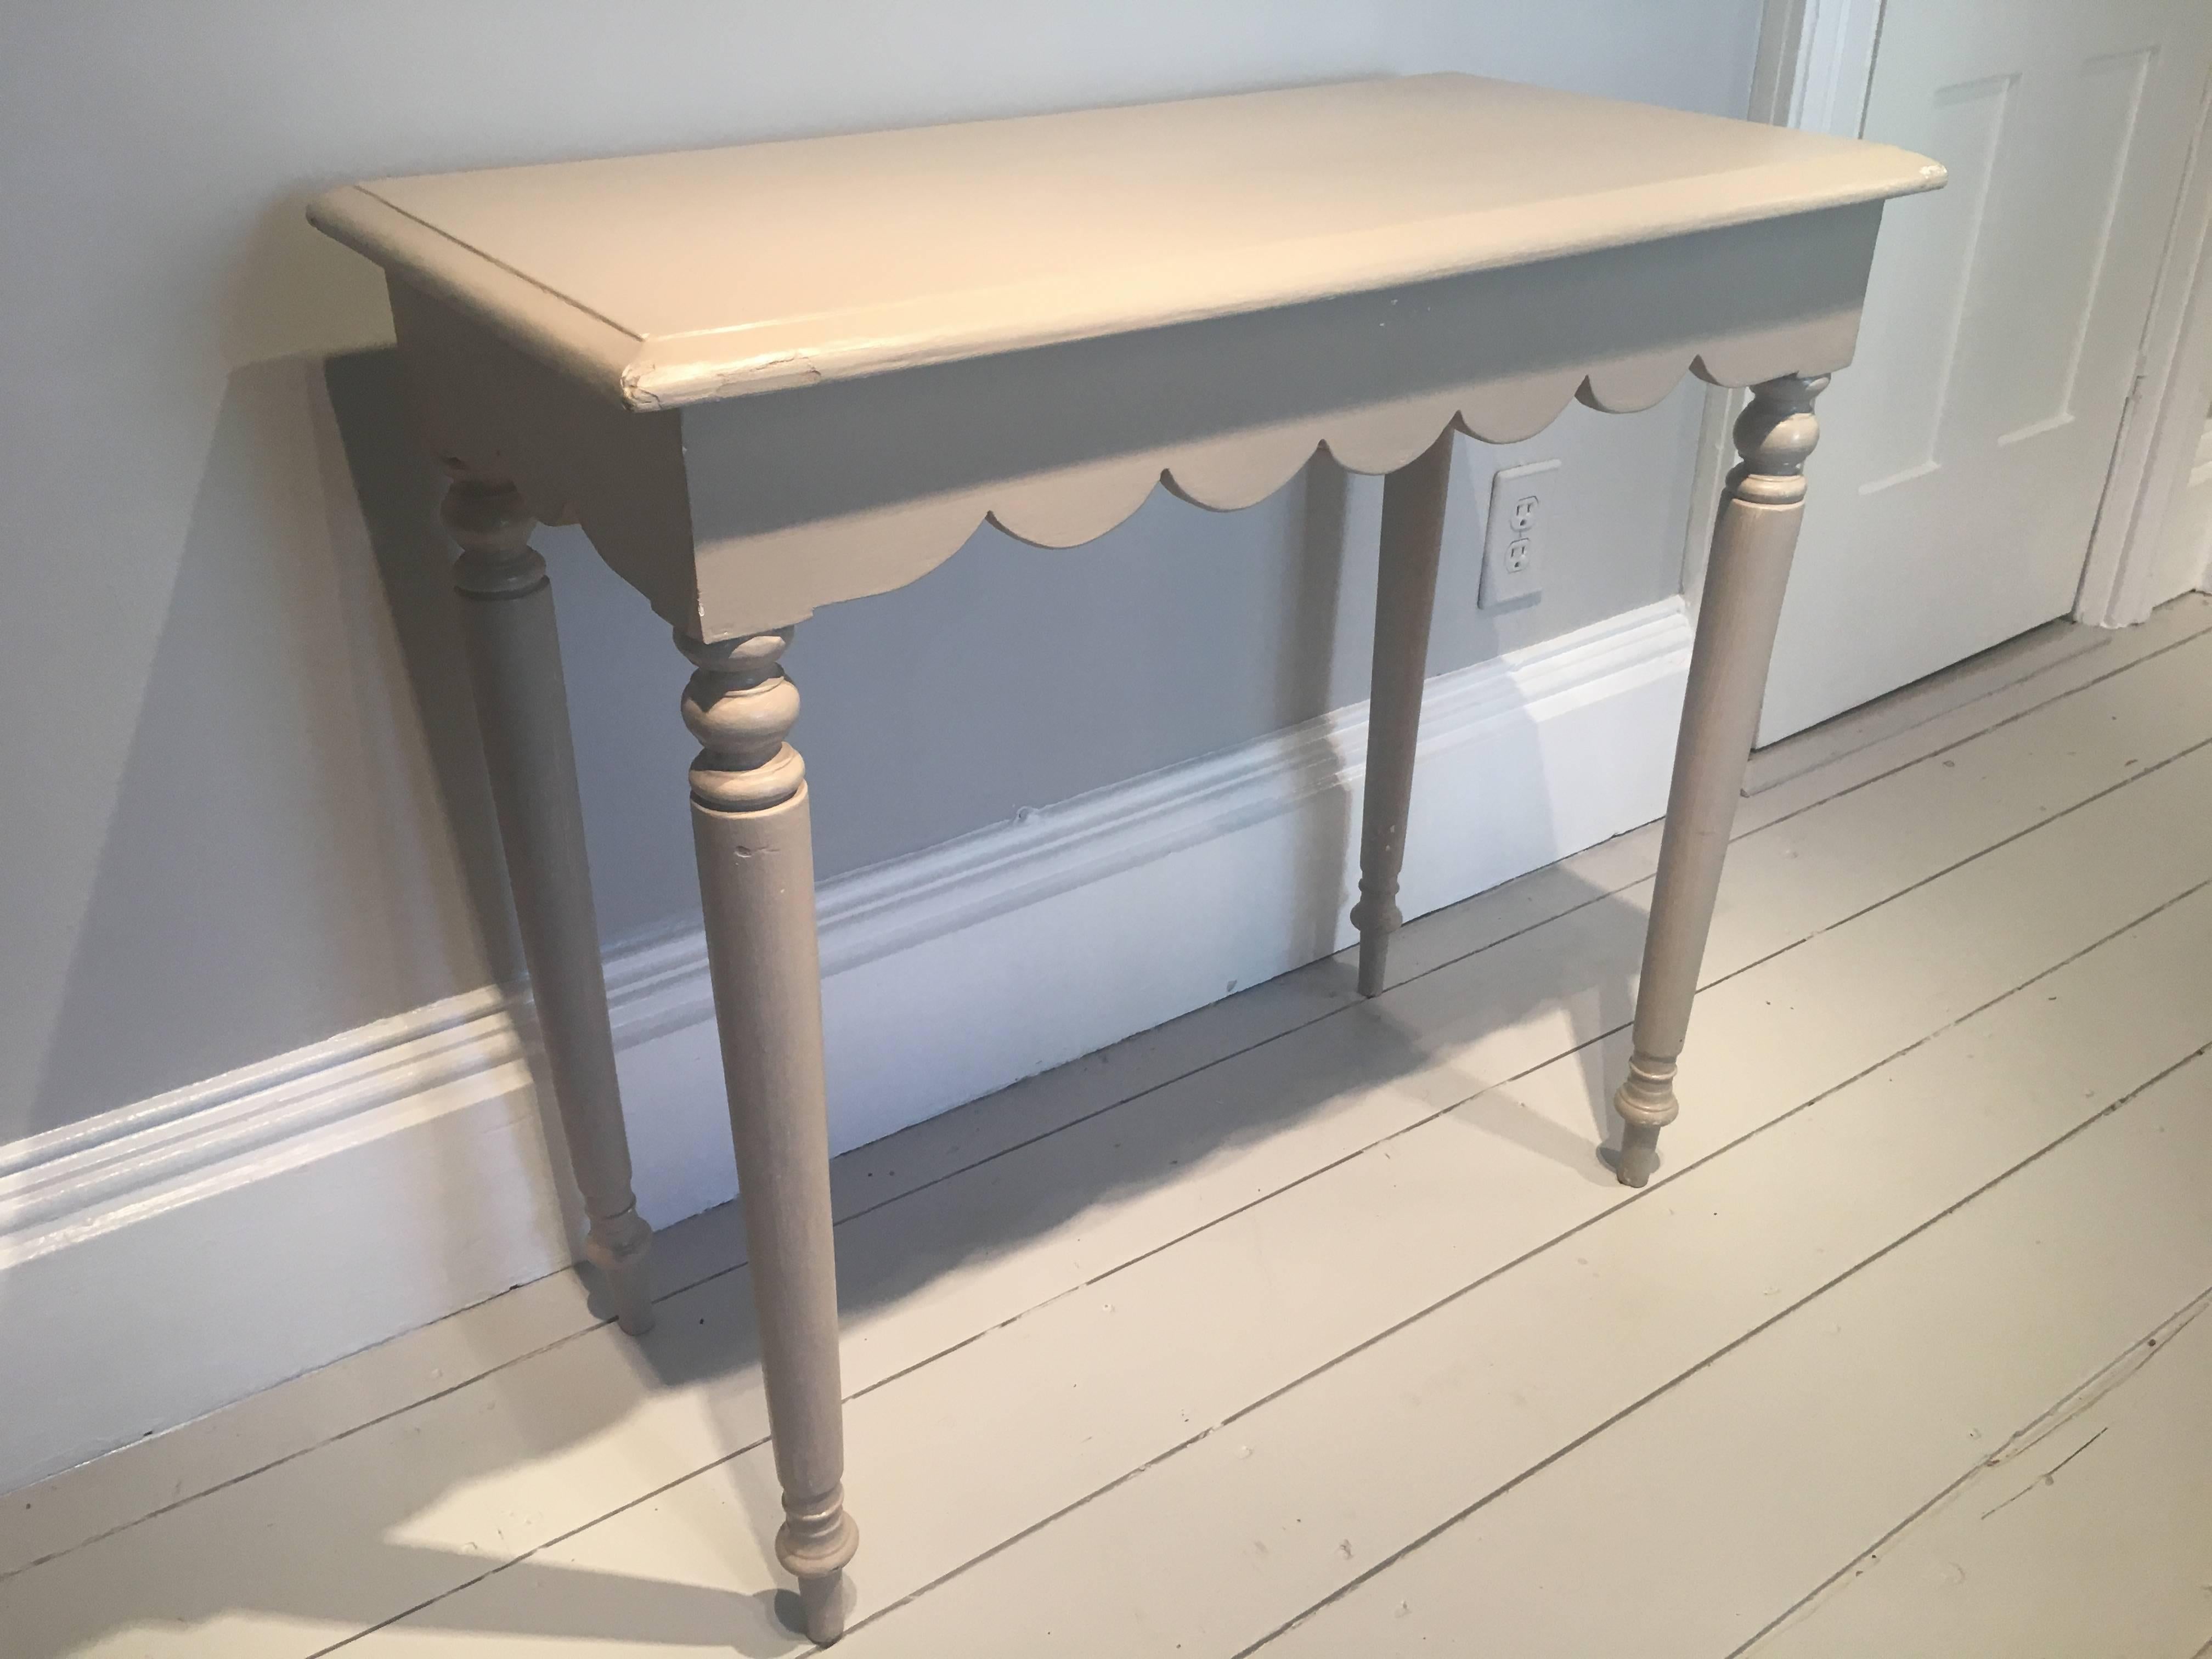 We love this table for its charming scalloped apron, versatile size, and detailed turned legs. Its pale grey paint with undertones of taupe is lovely, but not old, so no worries about repainting it if you so desire. Perfect as a petite dining table,